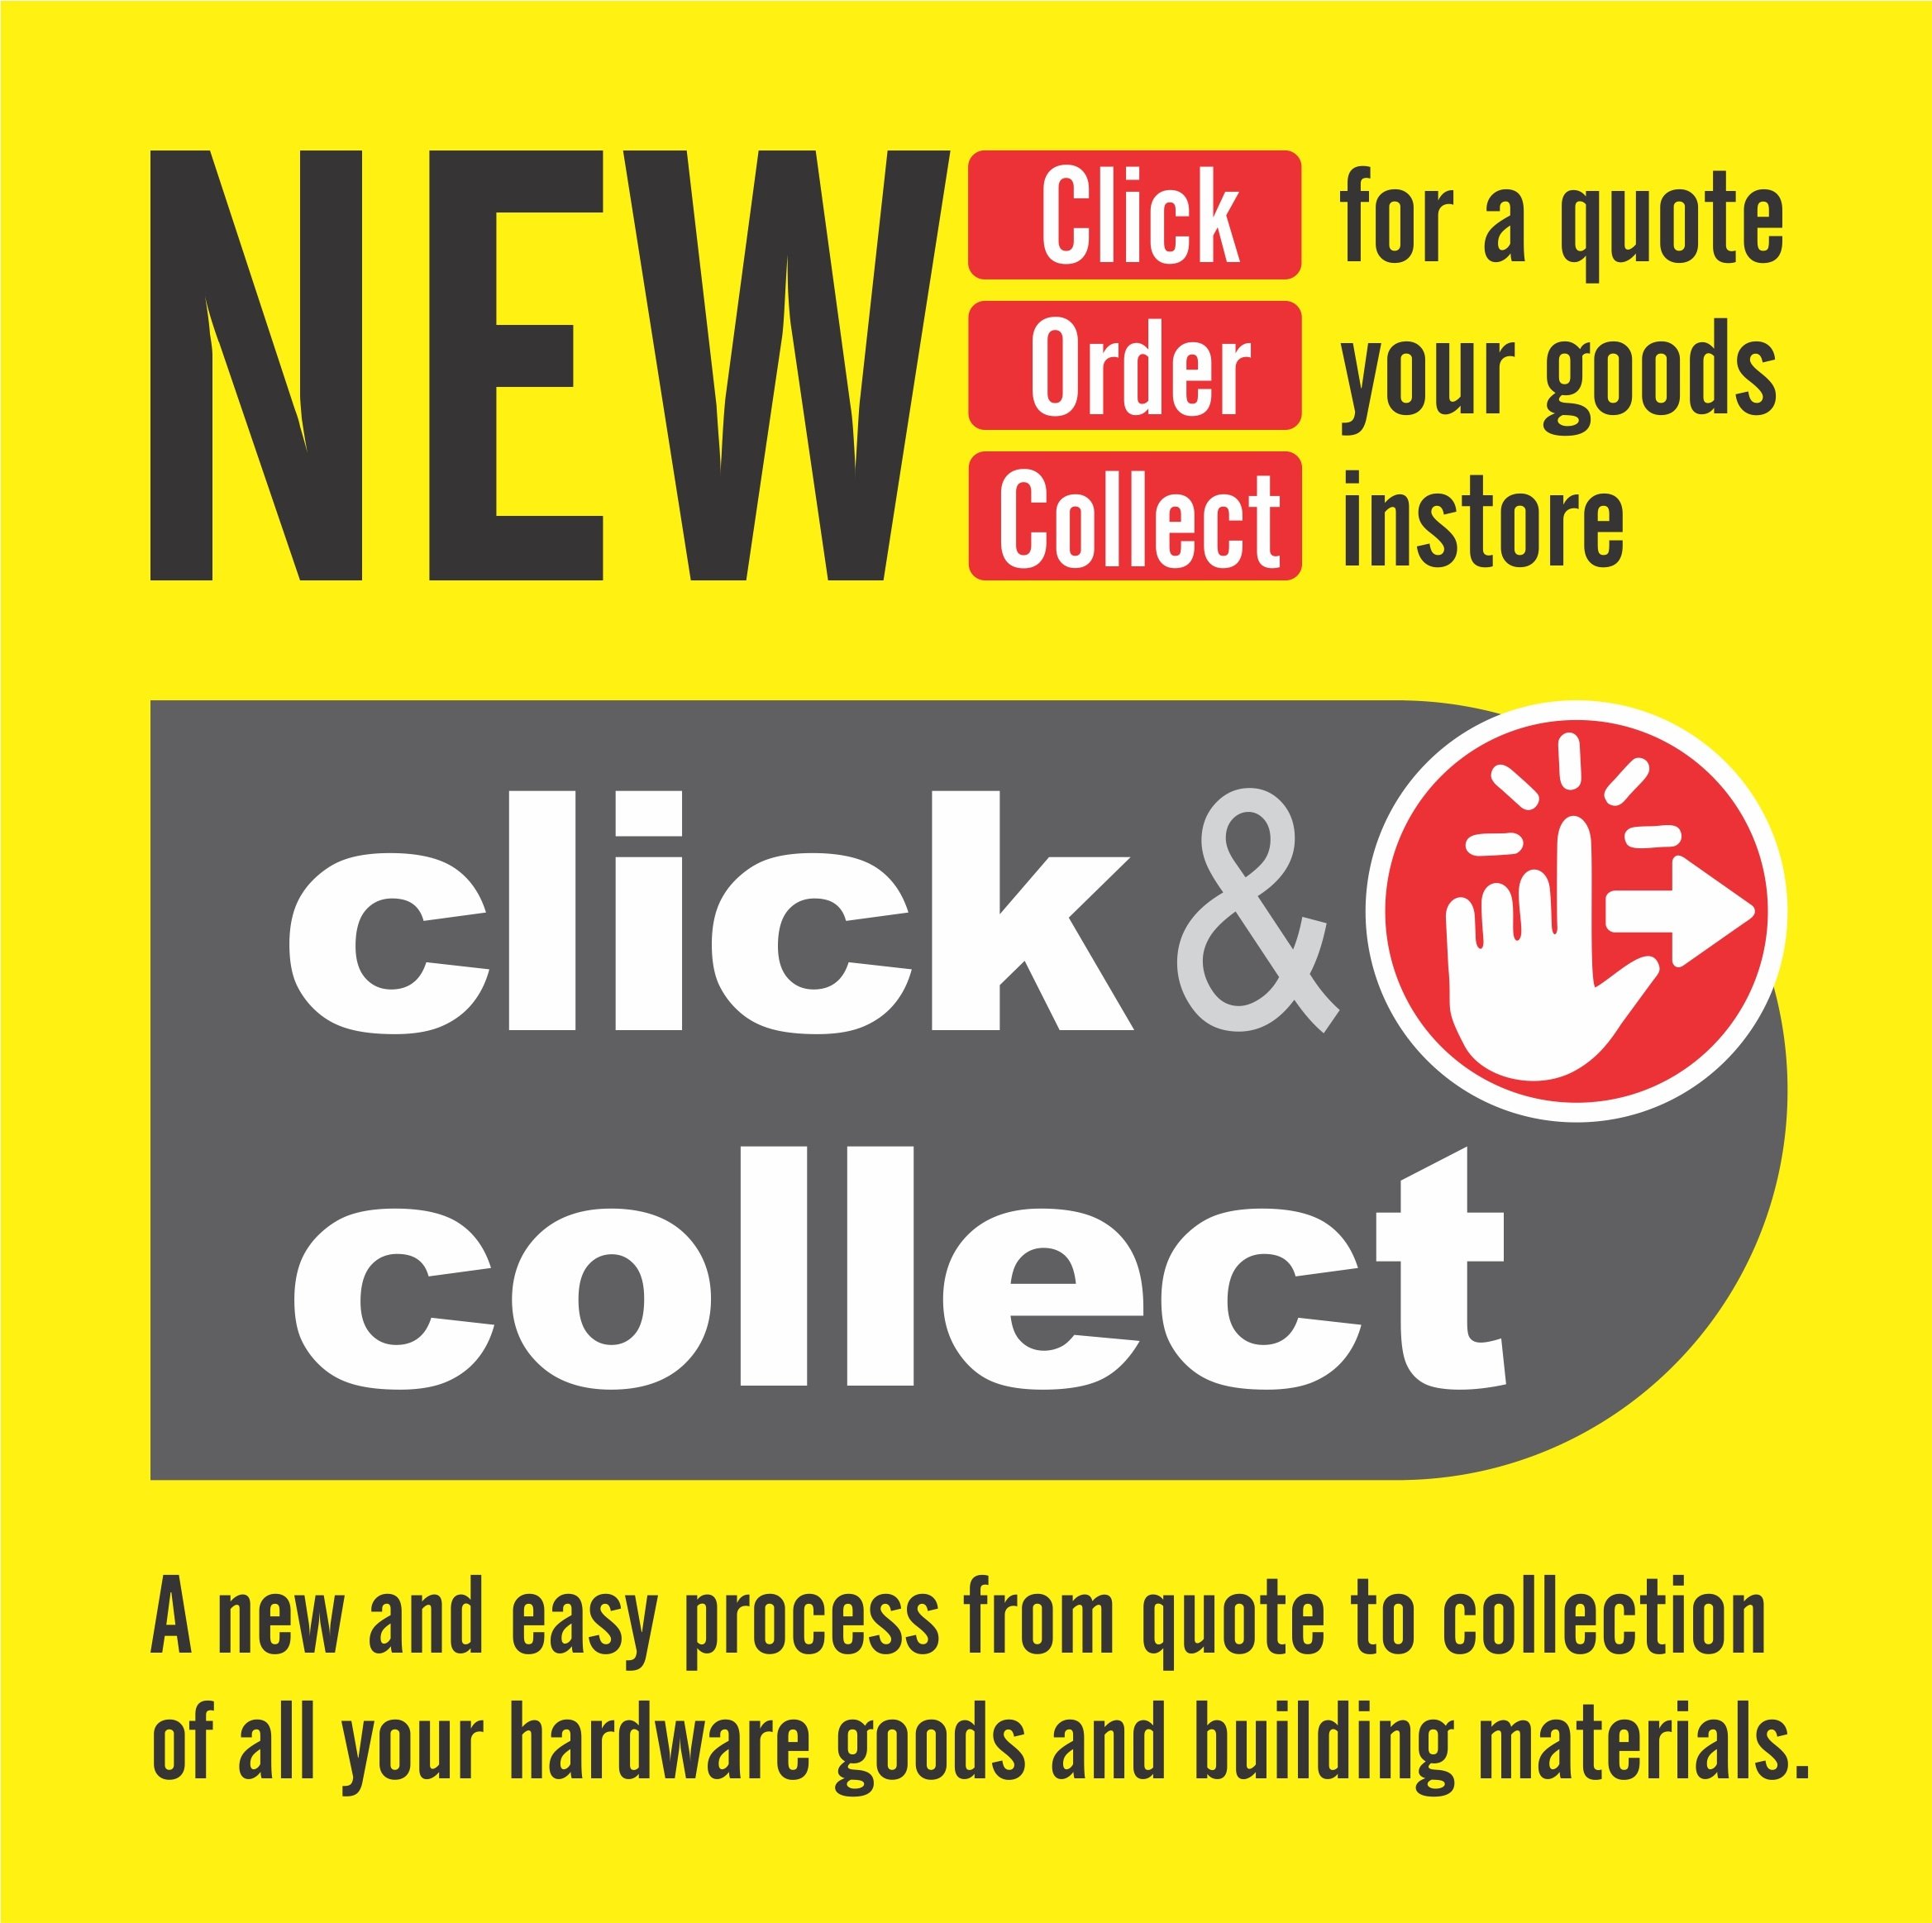 Flyer advertising new click for a quote, order your goods and collect instore text